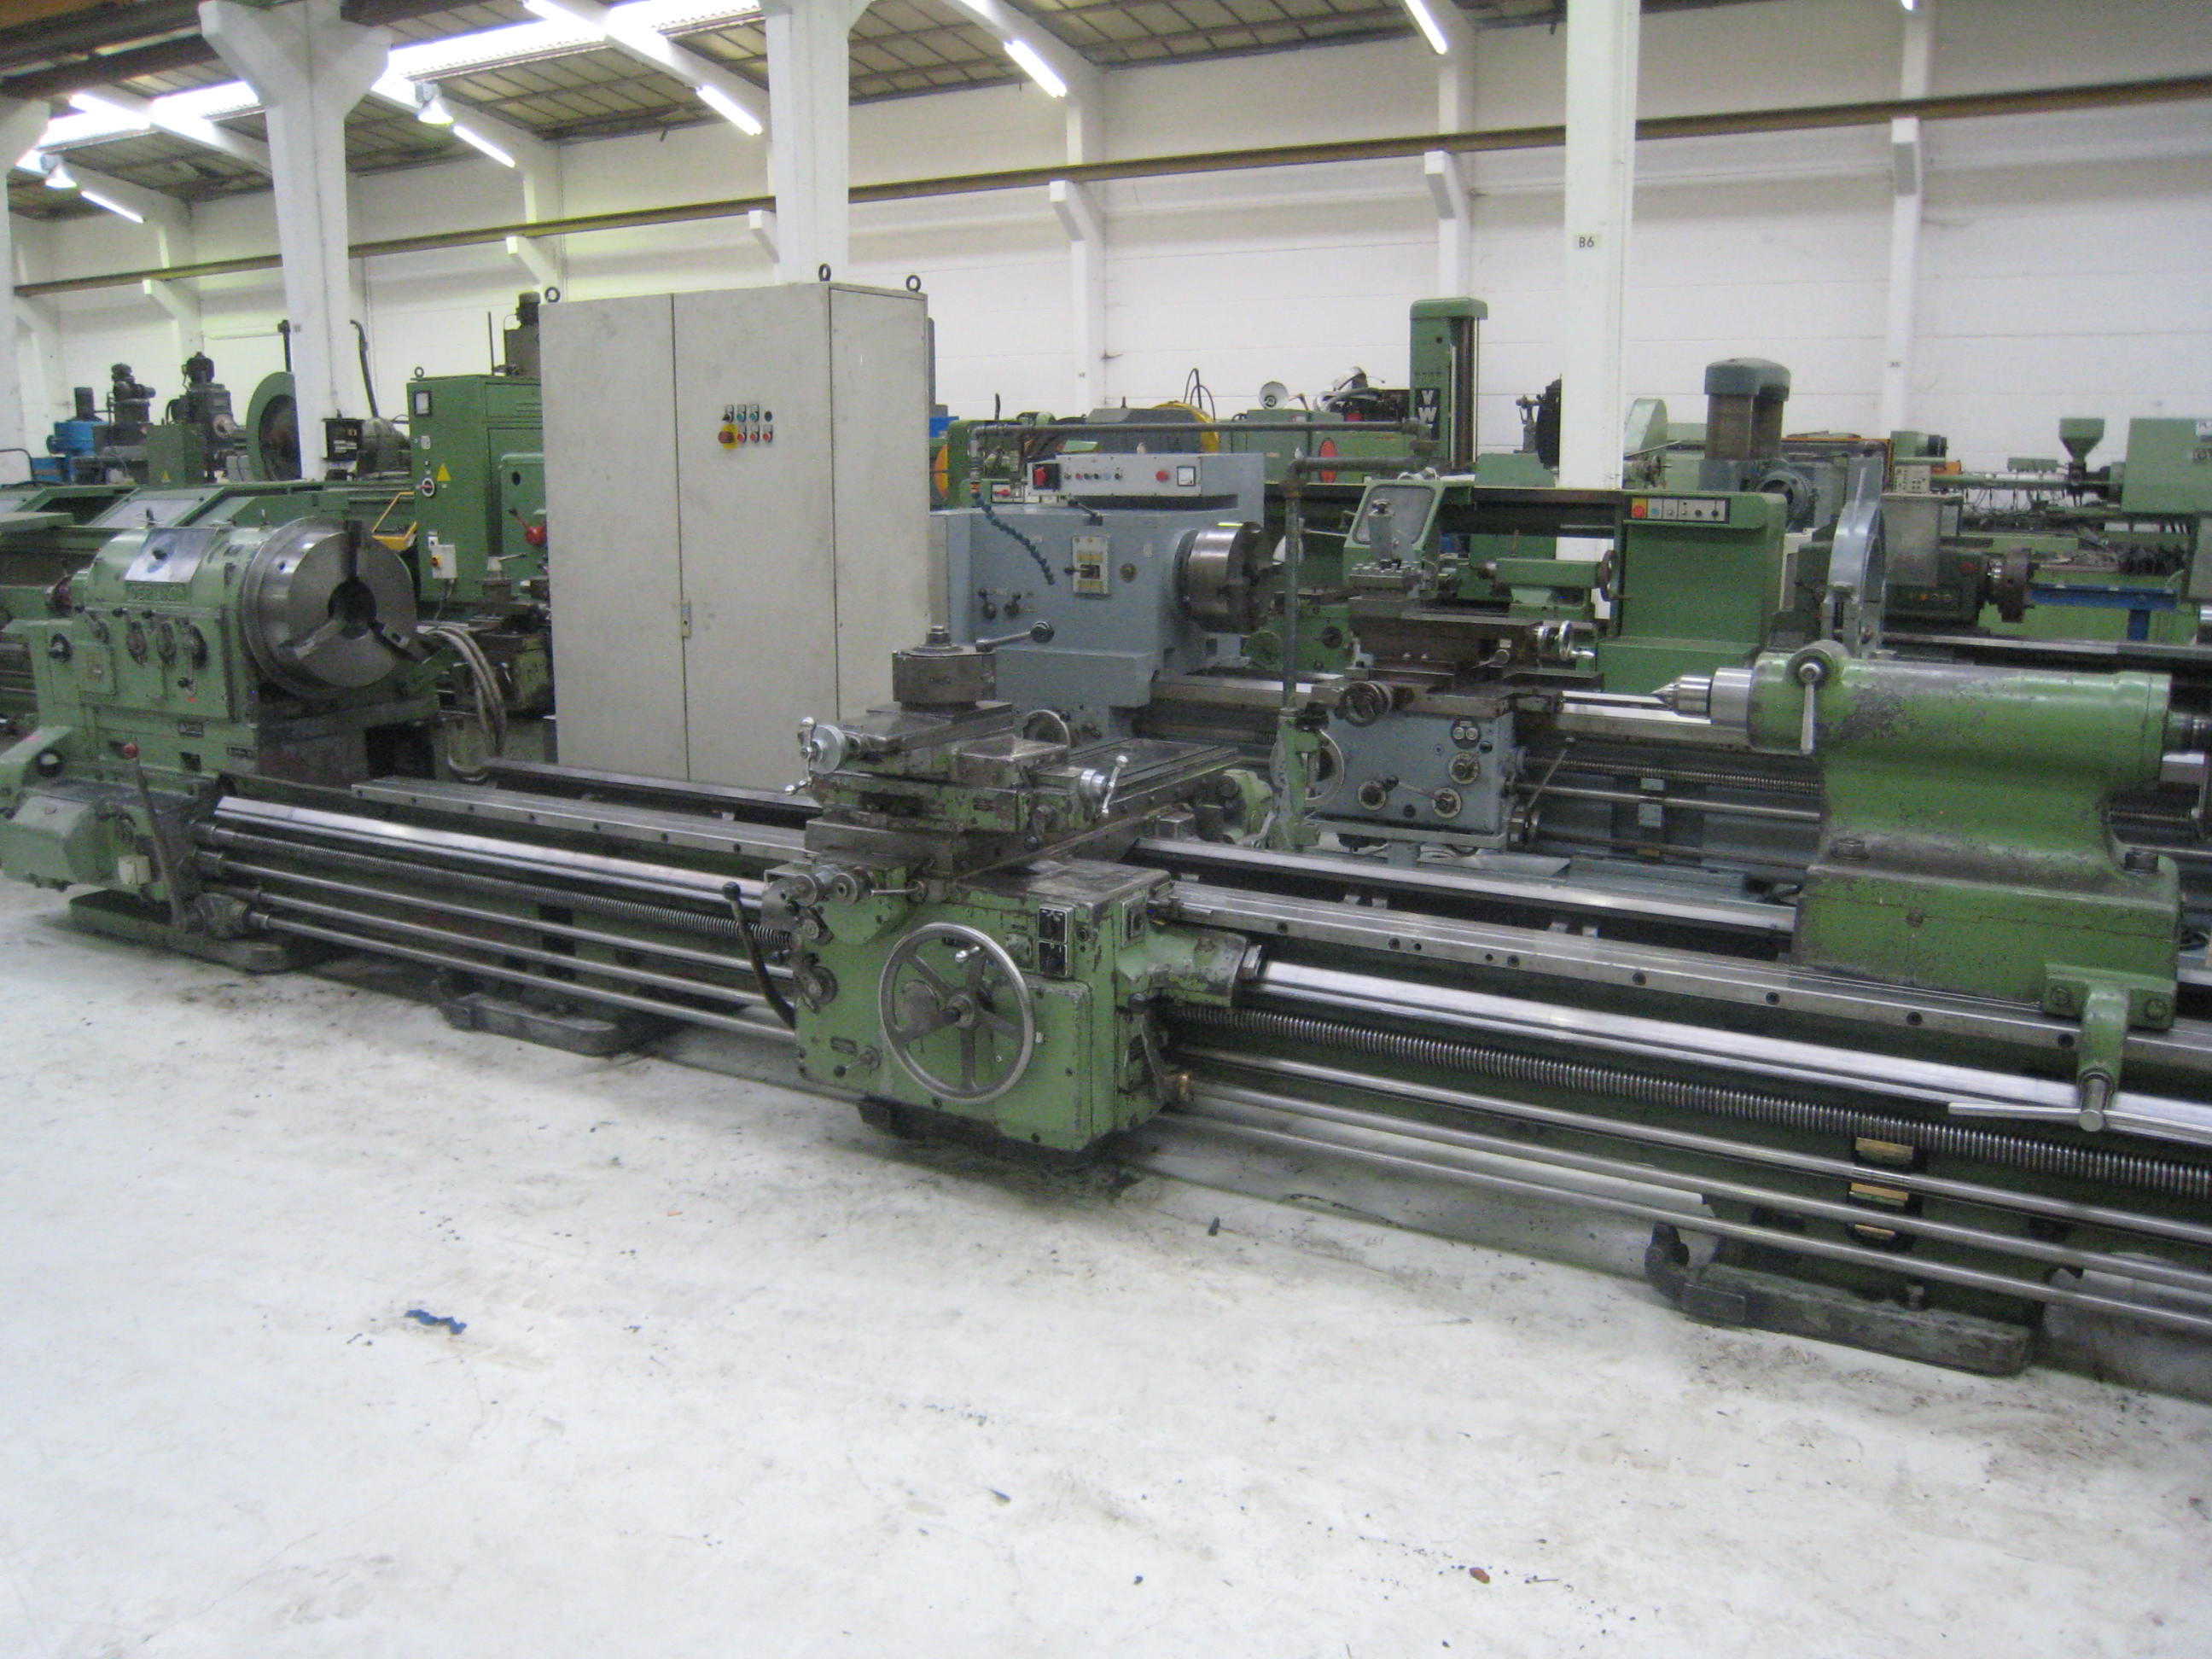 Conventional lathes/OERLIKON DM4A (11.547C)